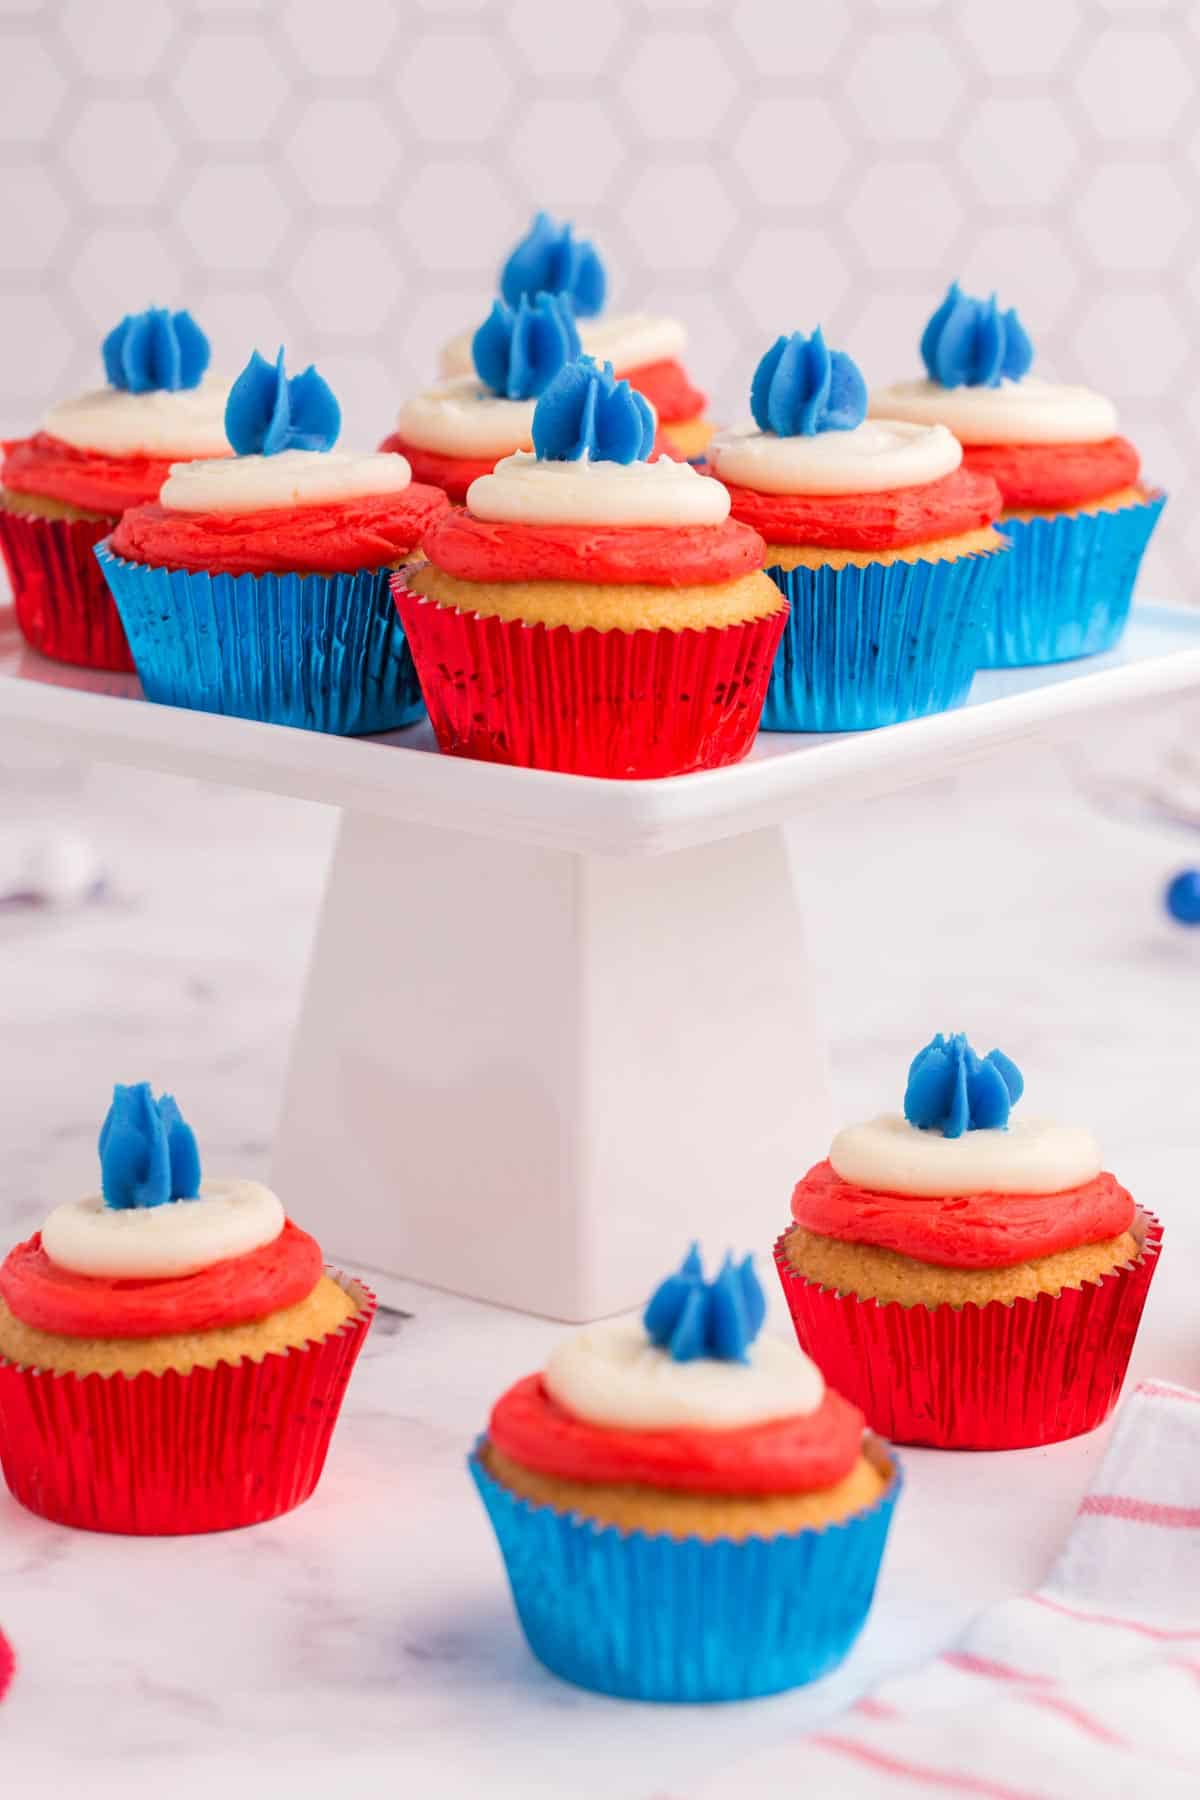 gluten free 4th of july cupcakes in red and blue foil liners on top of and next to a white cake stand